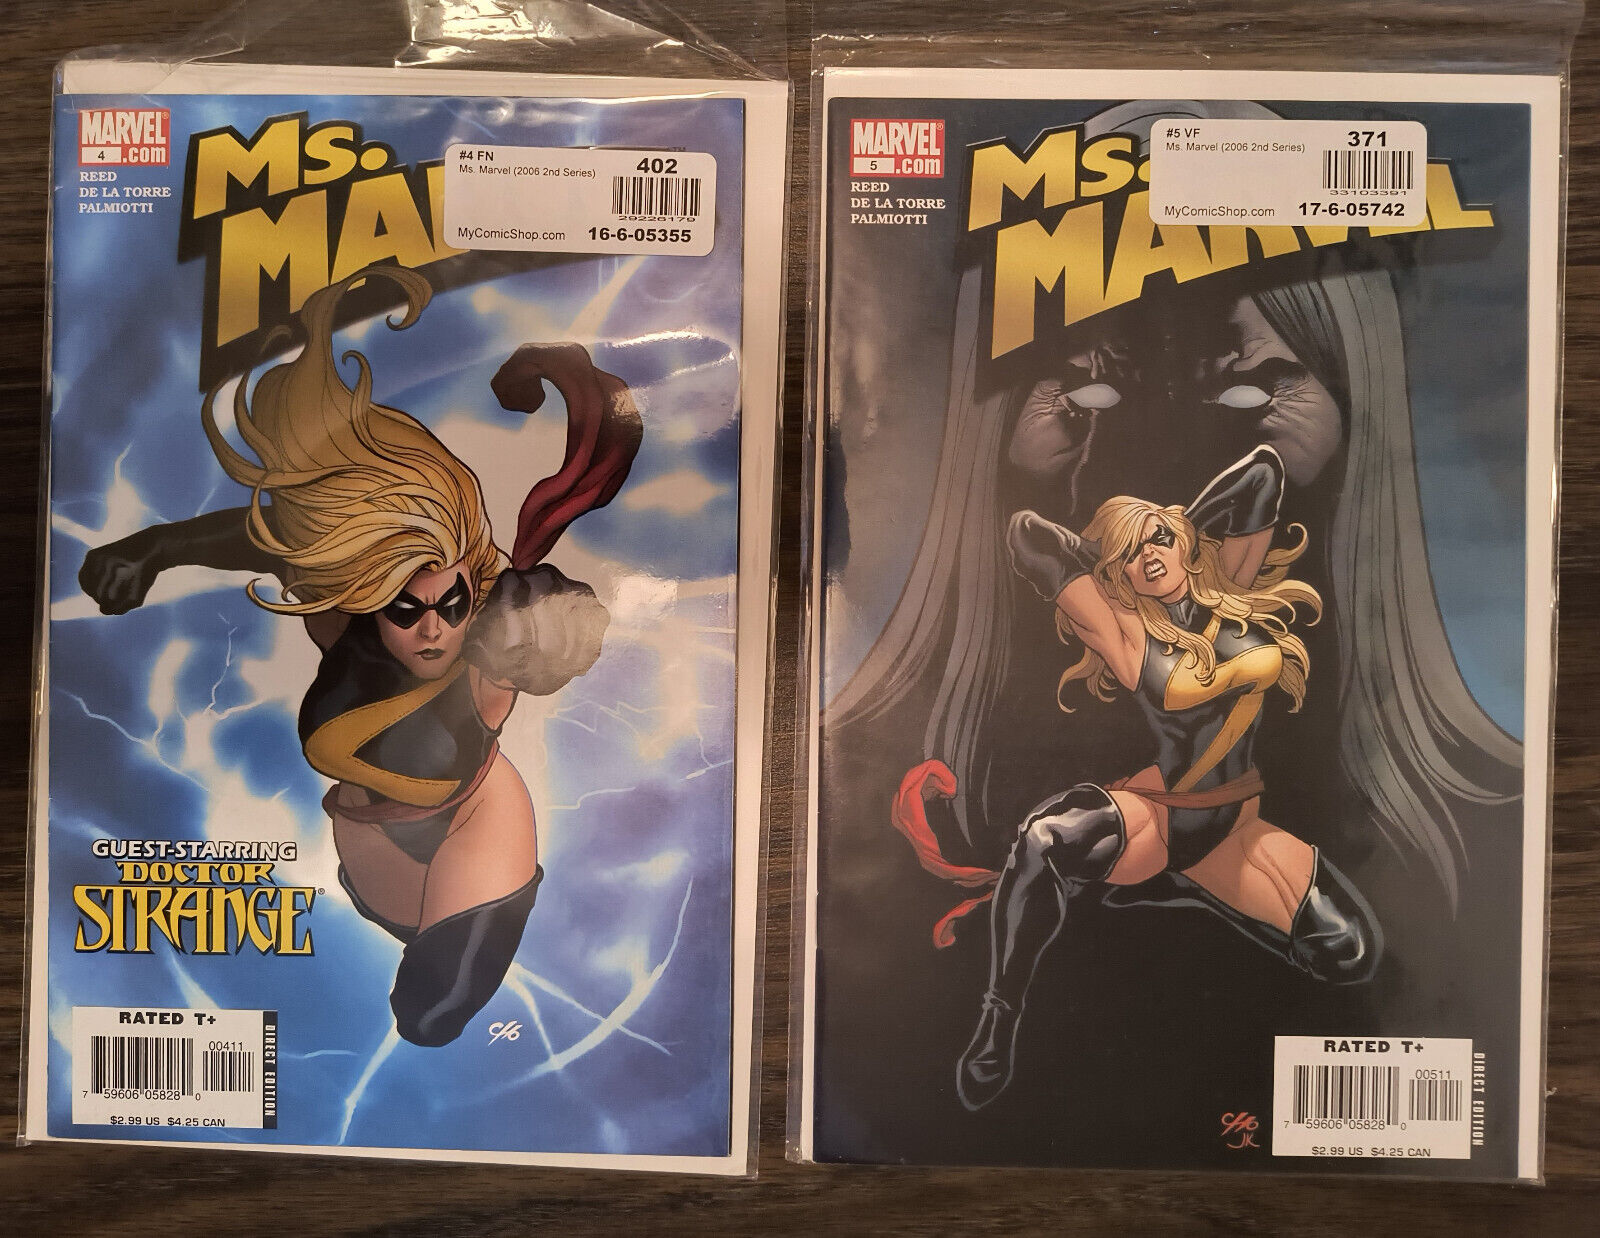 Ms. Marvel vol. 2 issues #4 and #5 (Carol Danvers) 2006